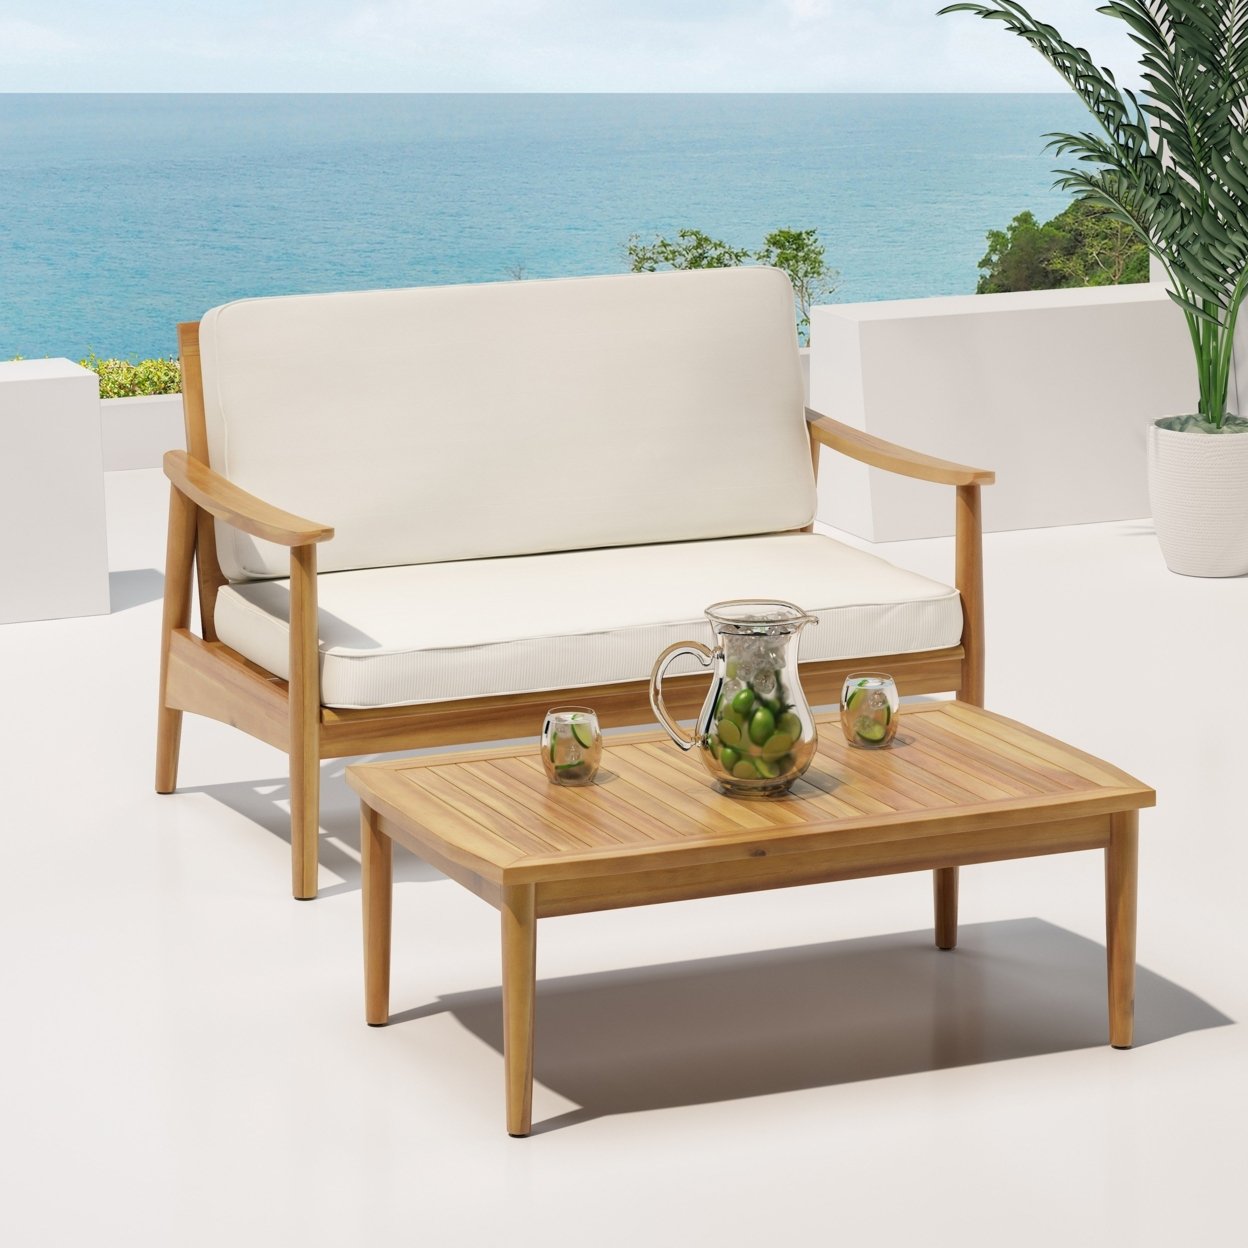 Emmry Outdoor Acacia Wood Loveseat Set With Coffee Table - Gray/dark Gray